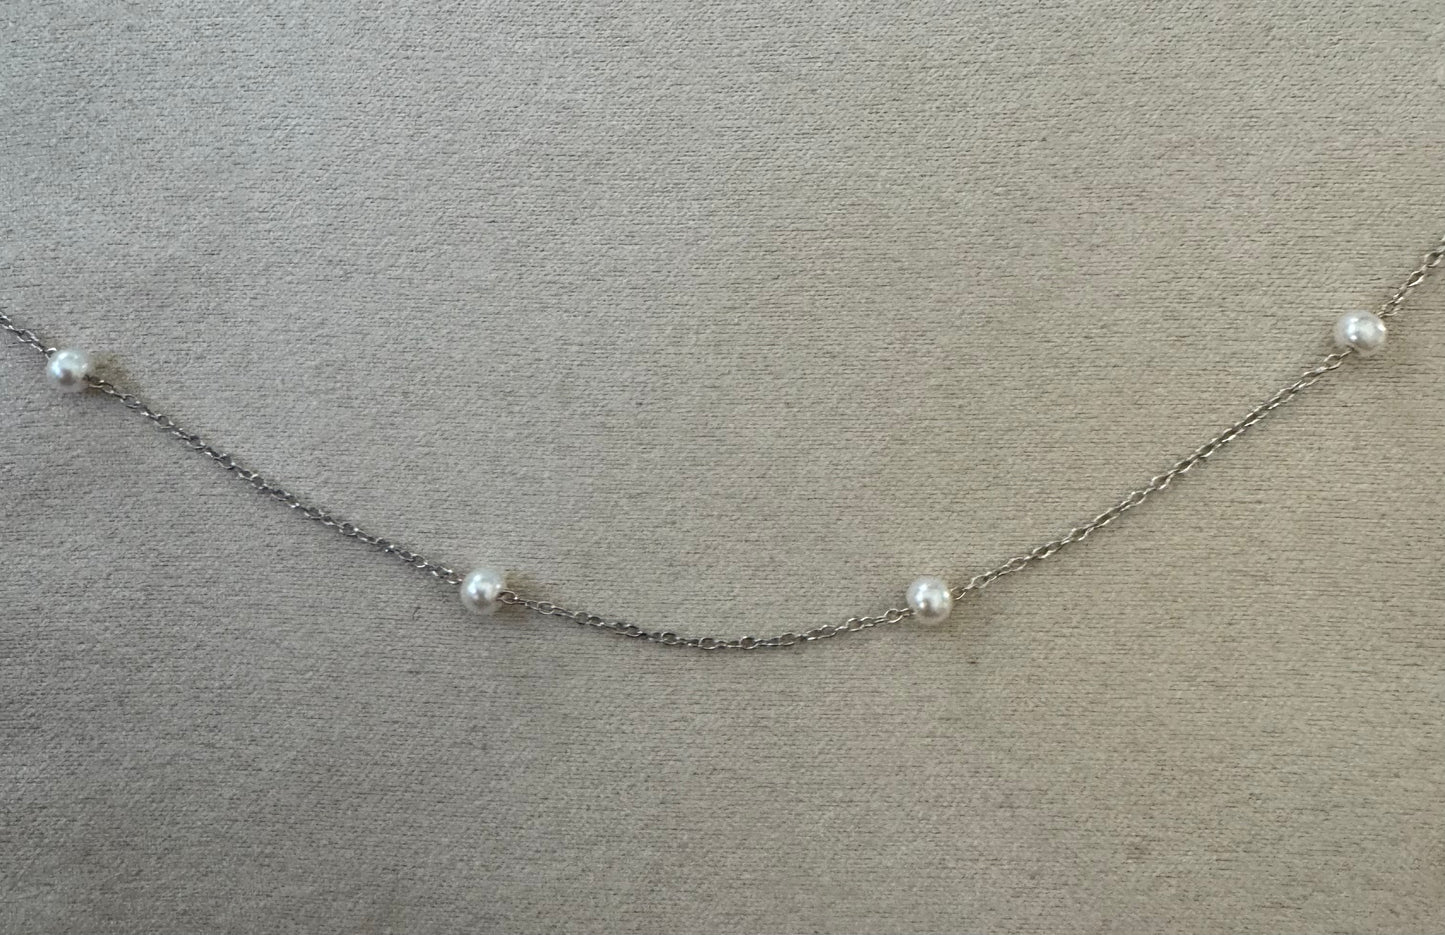 4. Solid sterling silver necklace 16-18 inches 

Have one